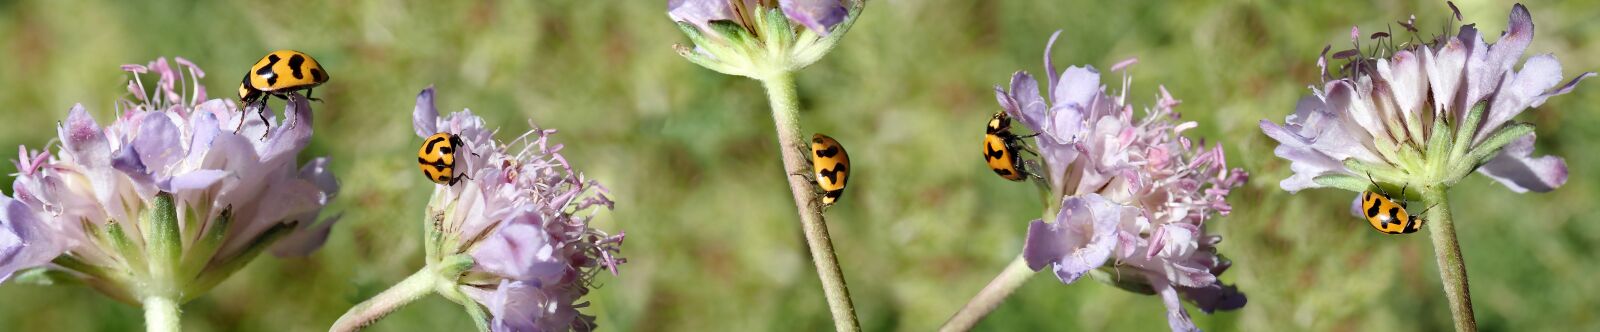 Olympus TG-5 sample photo. Insects, ladybirds, beetles photography